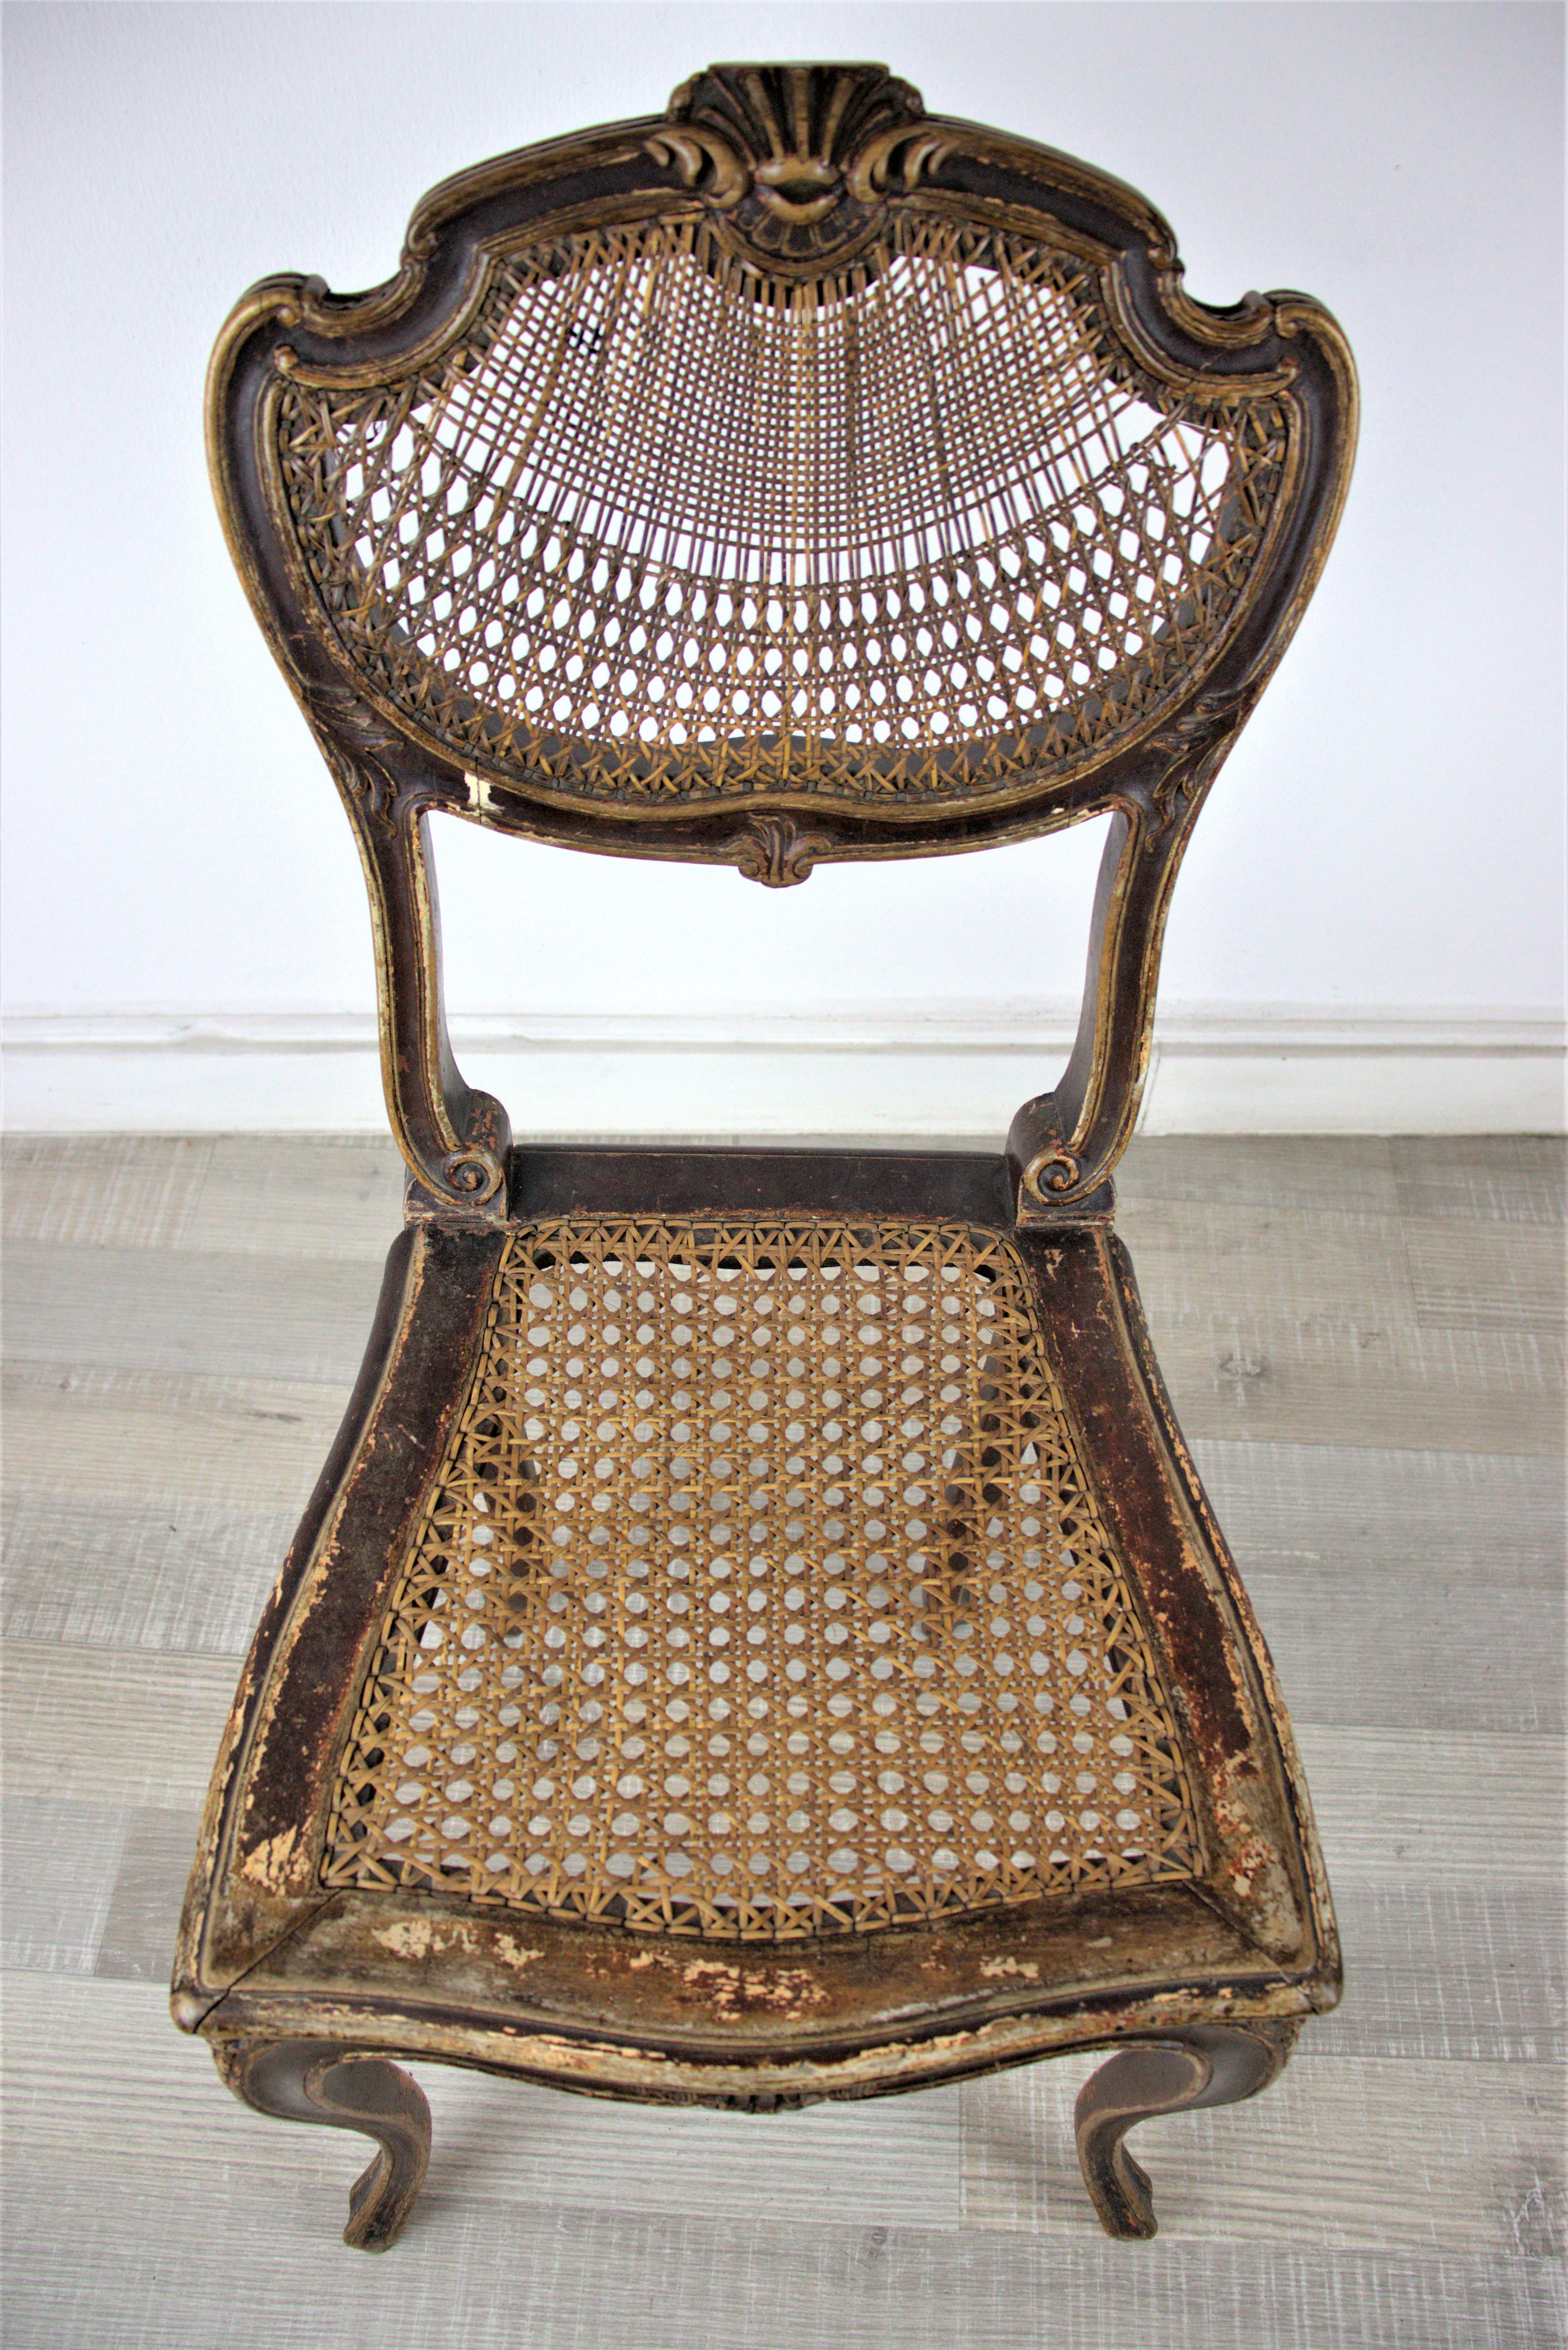 Viennese rococo, reeded and wooden small chair, from the end of the 18th century.

This piece is untouched antique! Use it as a fancy decoration in your residency. 

You can find a similar sofa within our sortiment, they look great togeather!